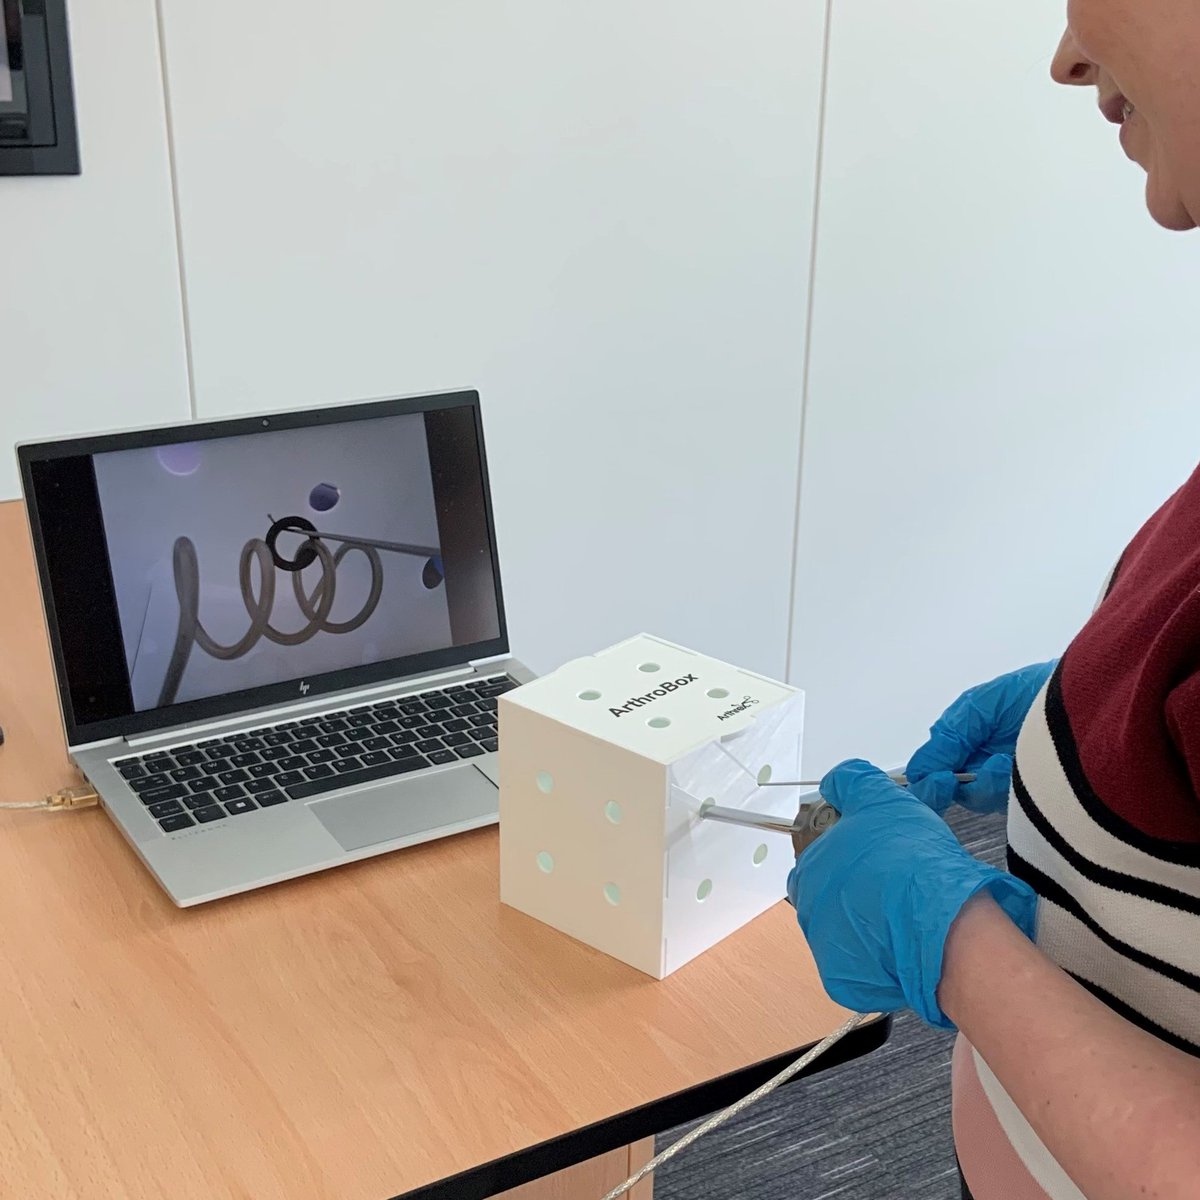 The second group of Scottish Trauma and Orthopaedic trainees are attending the Total Knee Arthroplasty course @scotsimcentre. They will be using @DePuySynthes VR headsets and @ArthrexMedEd #Arthrobox @NHS_Education @paton_catie #Learning #Simulation